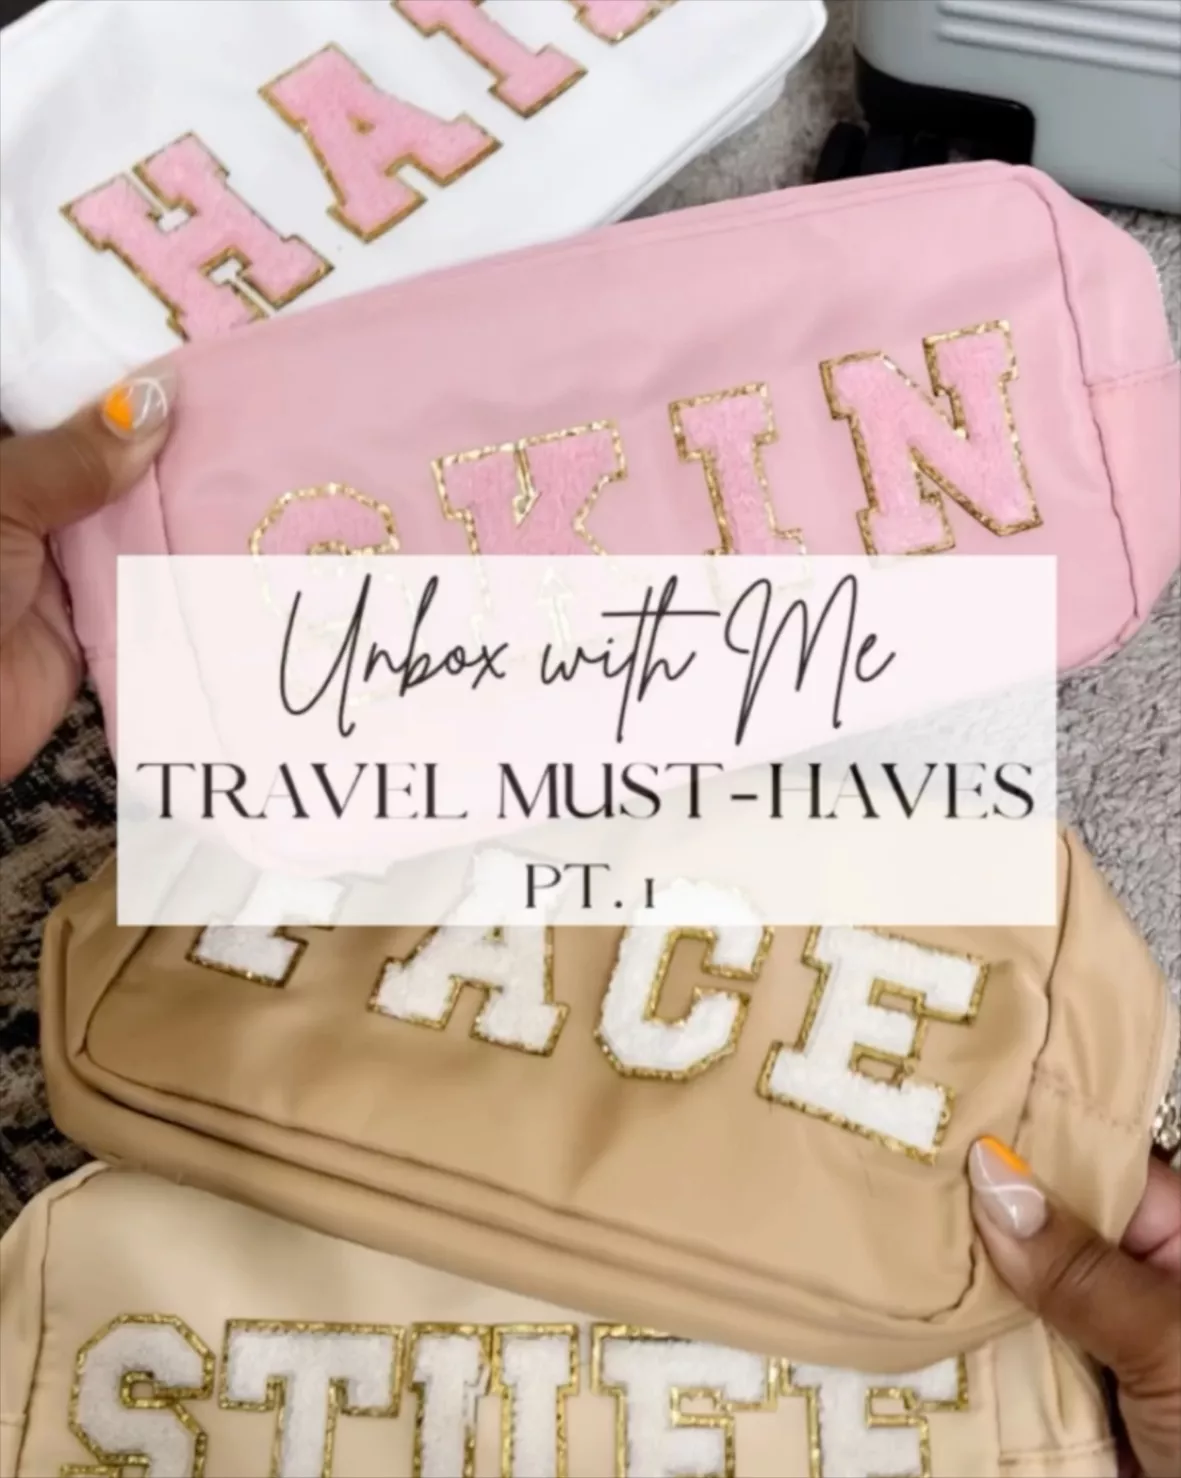 Too Faced Cosmetics Too Faced … curated on LTK